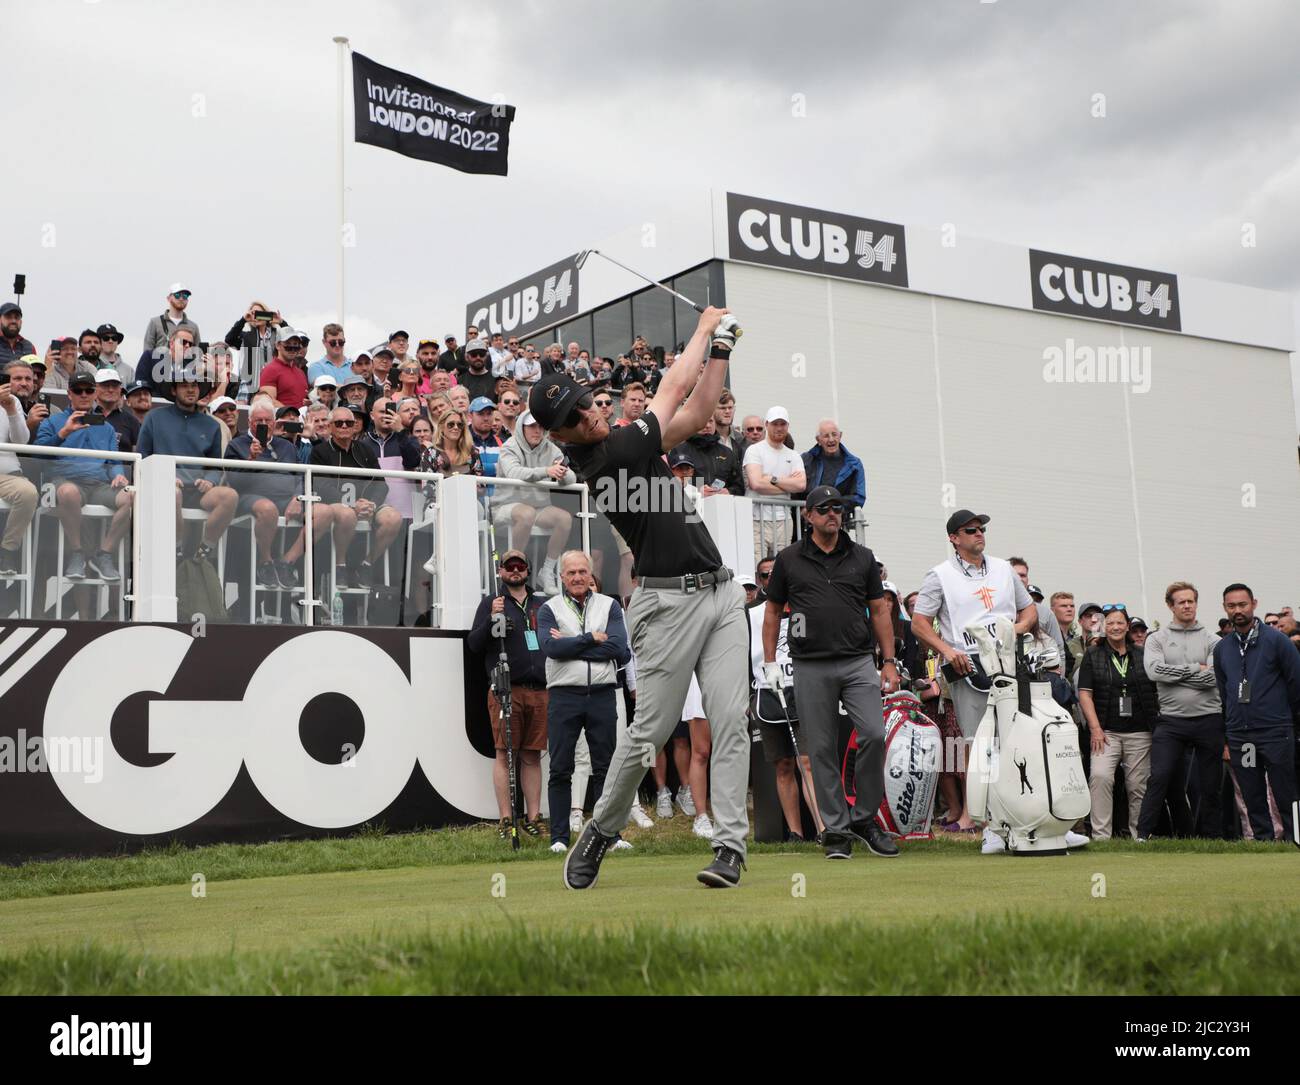 London, UK. 09th June, 2022. Scott Vincent tees off on the 1st hole during the first round of the inaugural LIV Golf event at the Centurion club in Hertfordshire on Thurssday, June 09, 2022.The event is 12 teams of four players competing over 54 holes for a prize pot of $25million dollars to the winning team. Photo by Hugo Philpott/UPI Credit: UPI/Alamy Live News Stock Photo